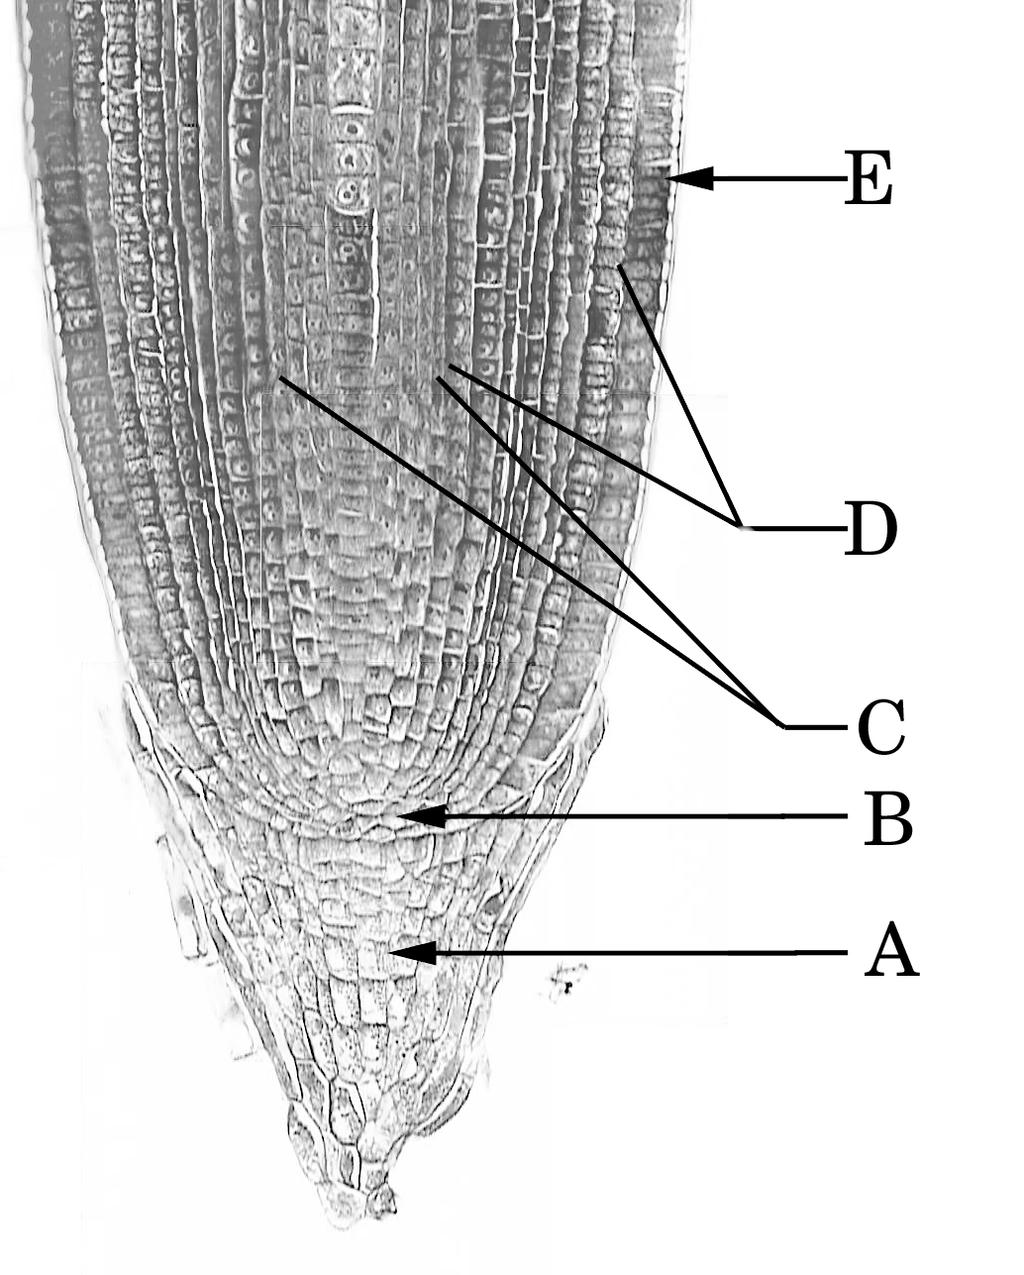 Label the Figure A = B = C = D = E = Longitudinal Section of a Root. All the tissues of this root are either cells of the apical meristem of the root, or else were derived from that meristem.